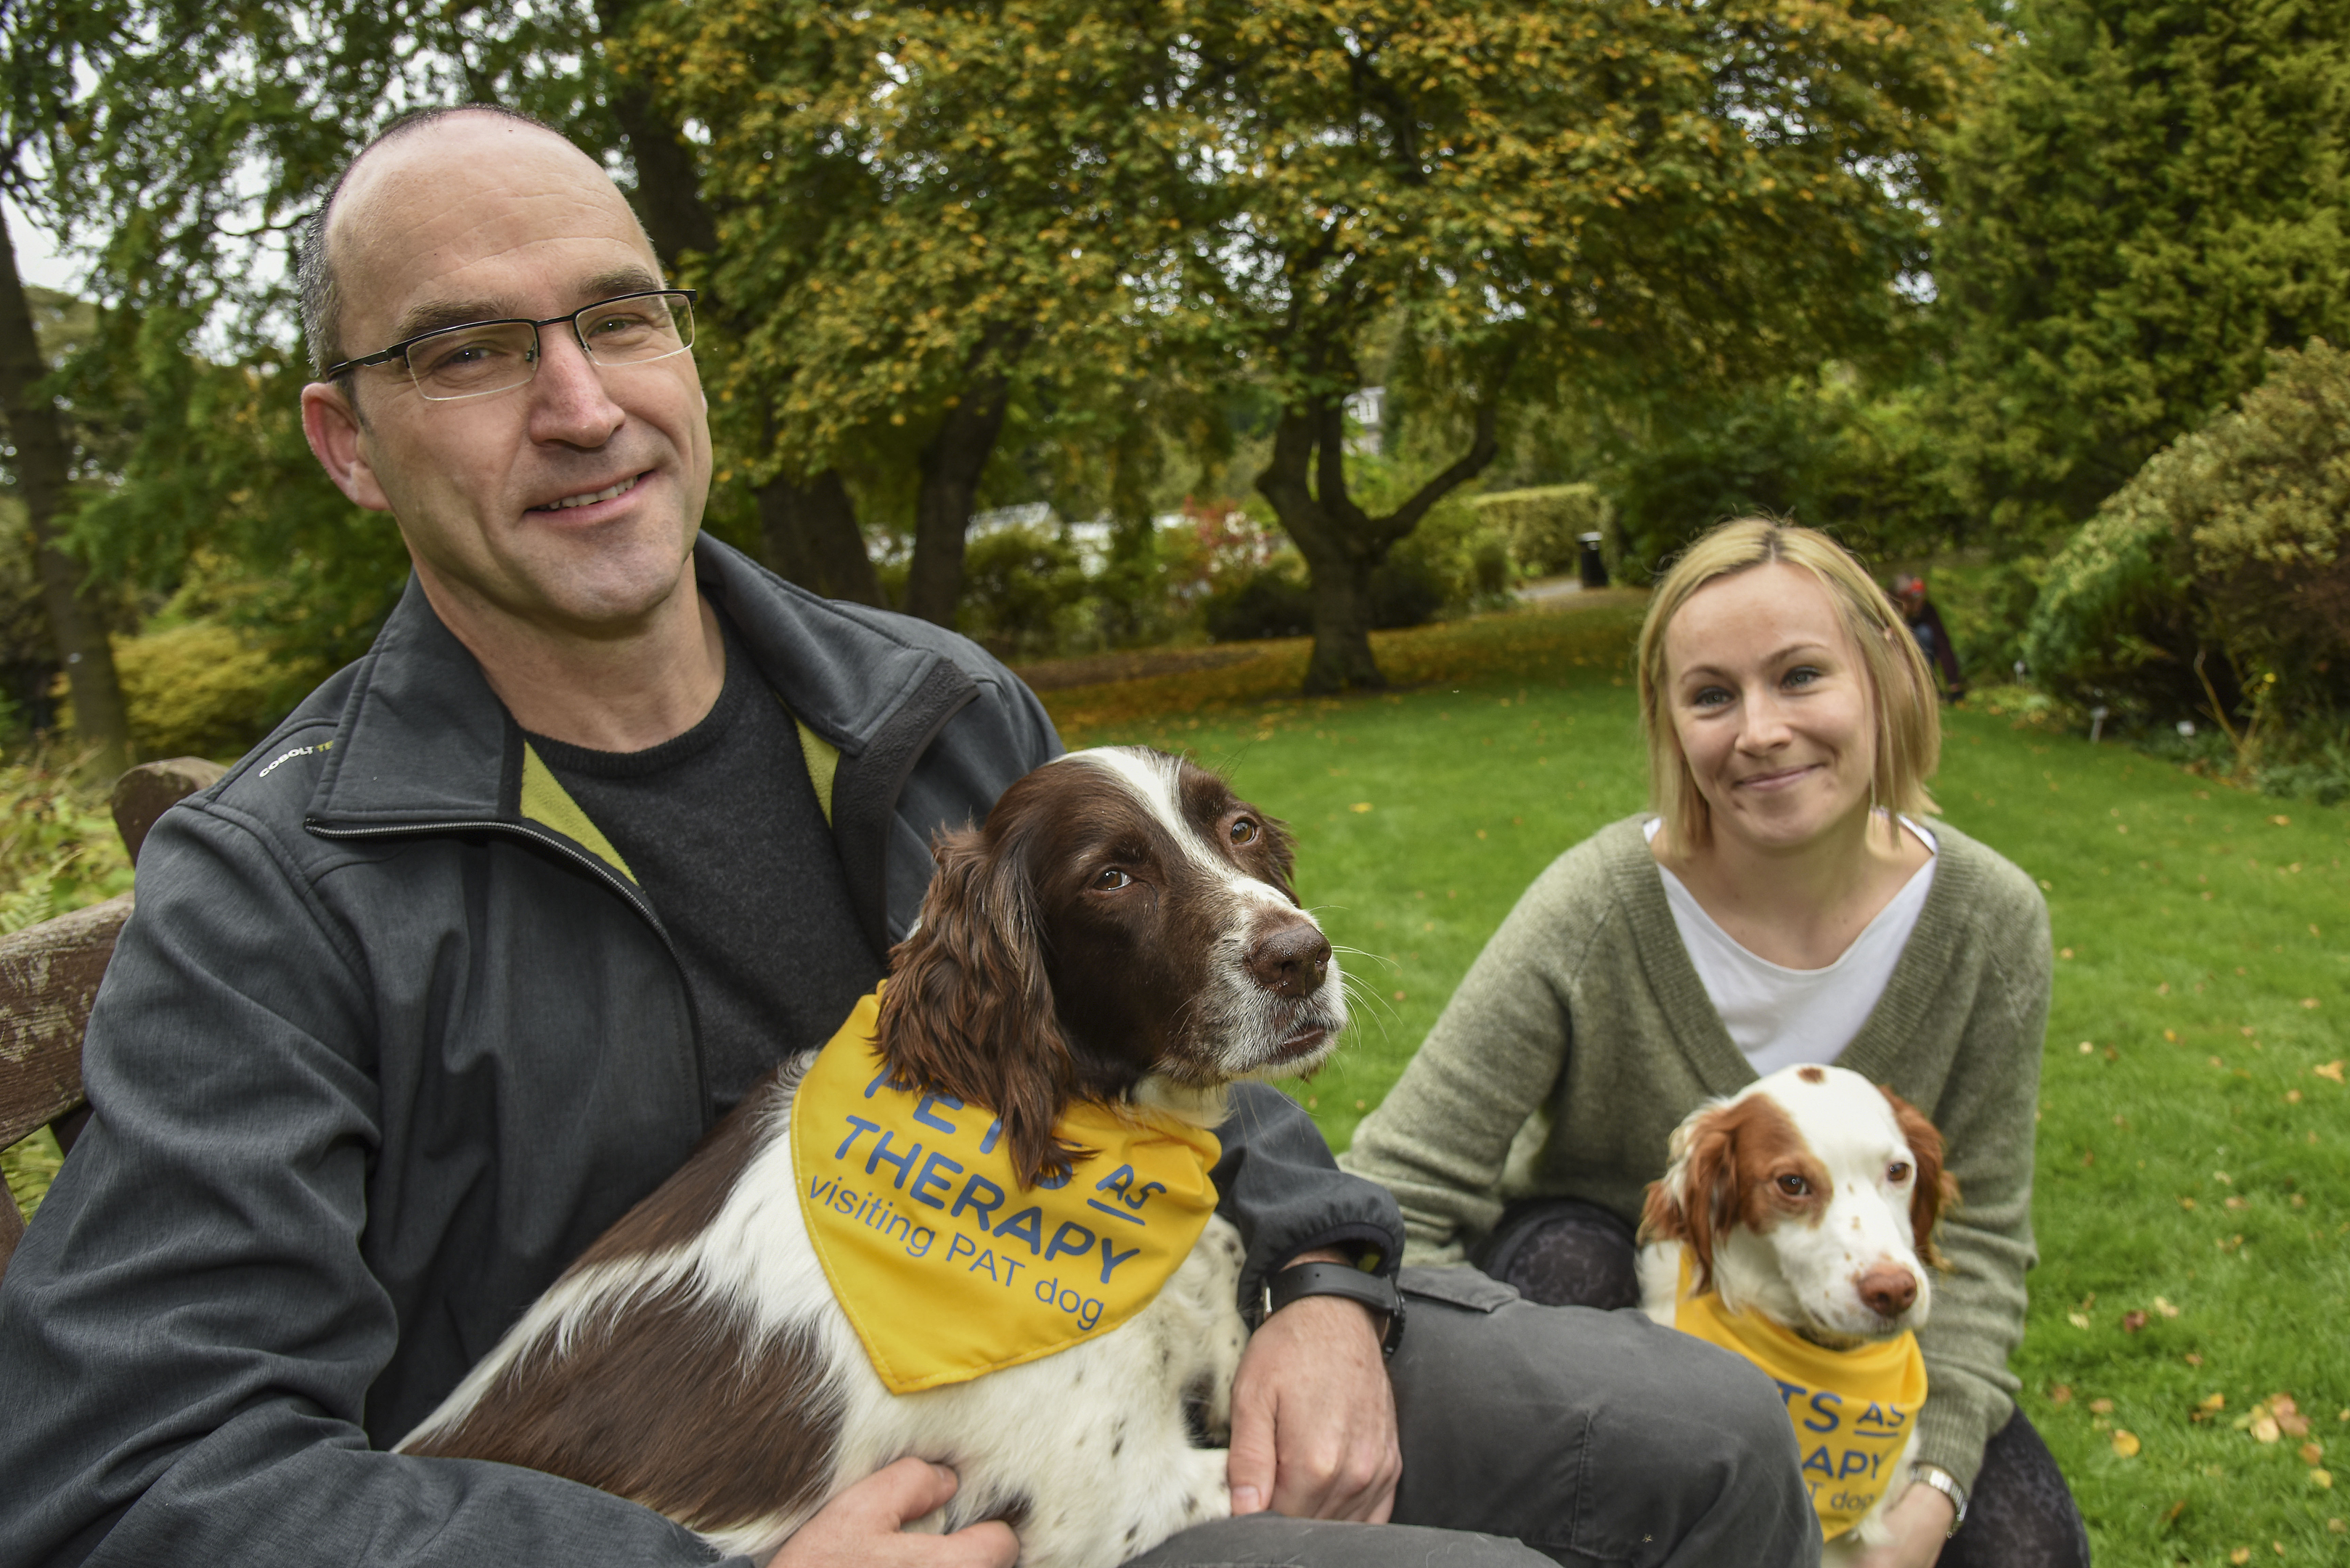 The big-hearted spaniels are no strangers to university life, and have been travelling to the campus with their owners, John and Emily Baird, for years.